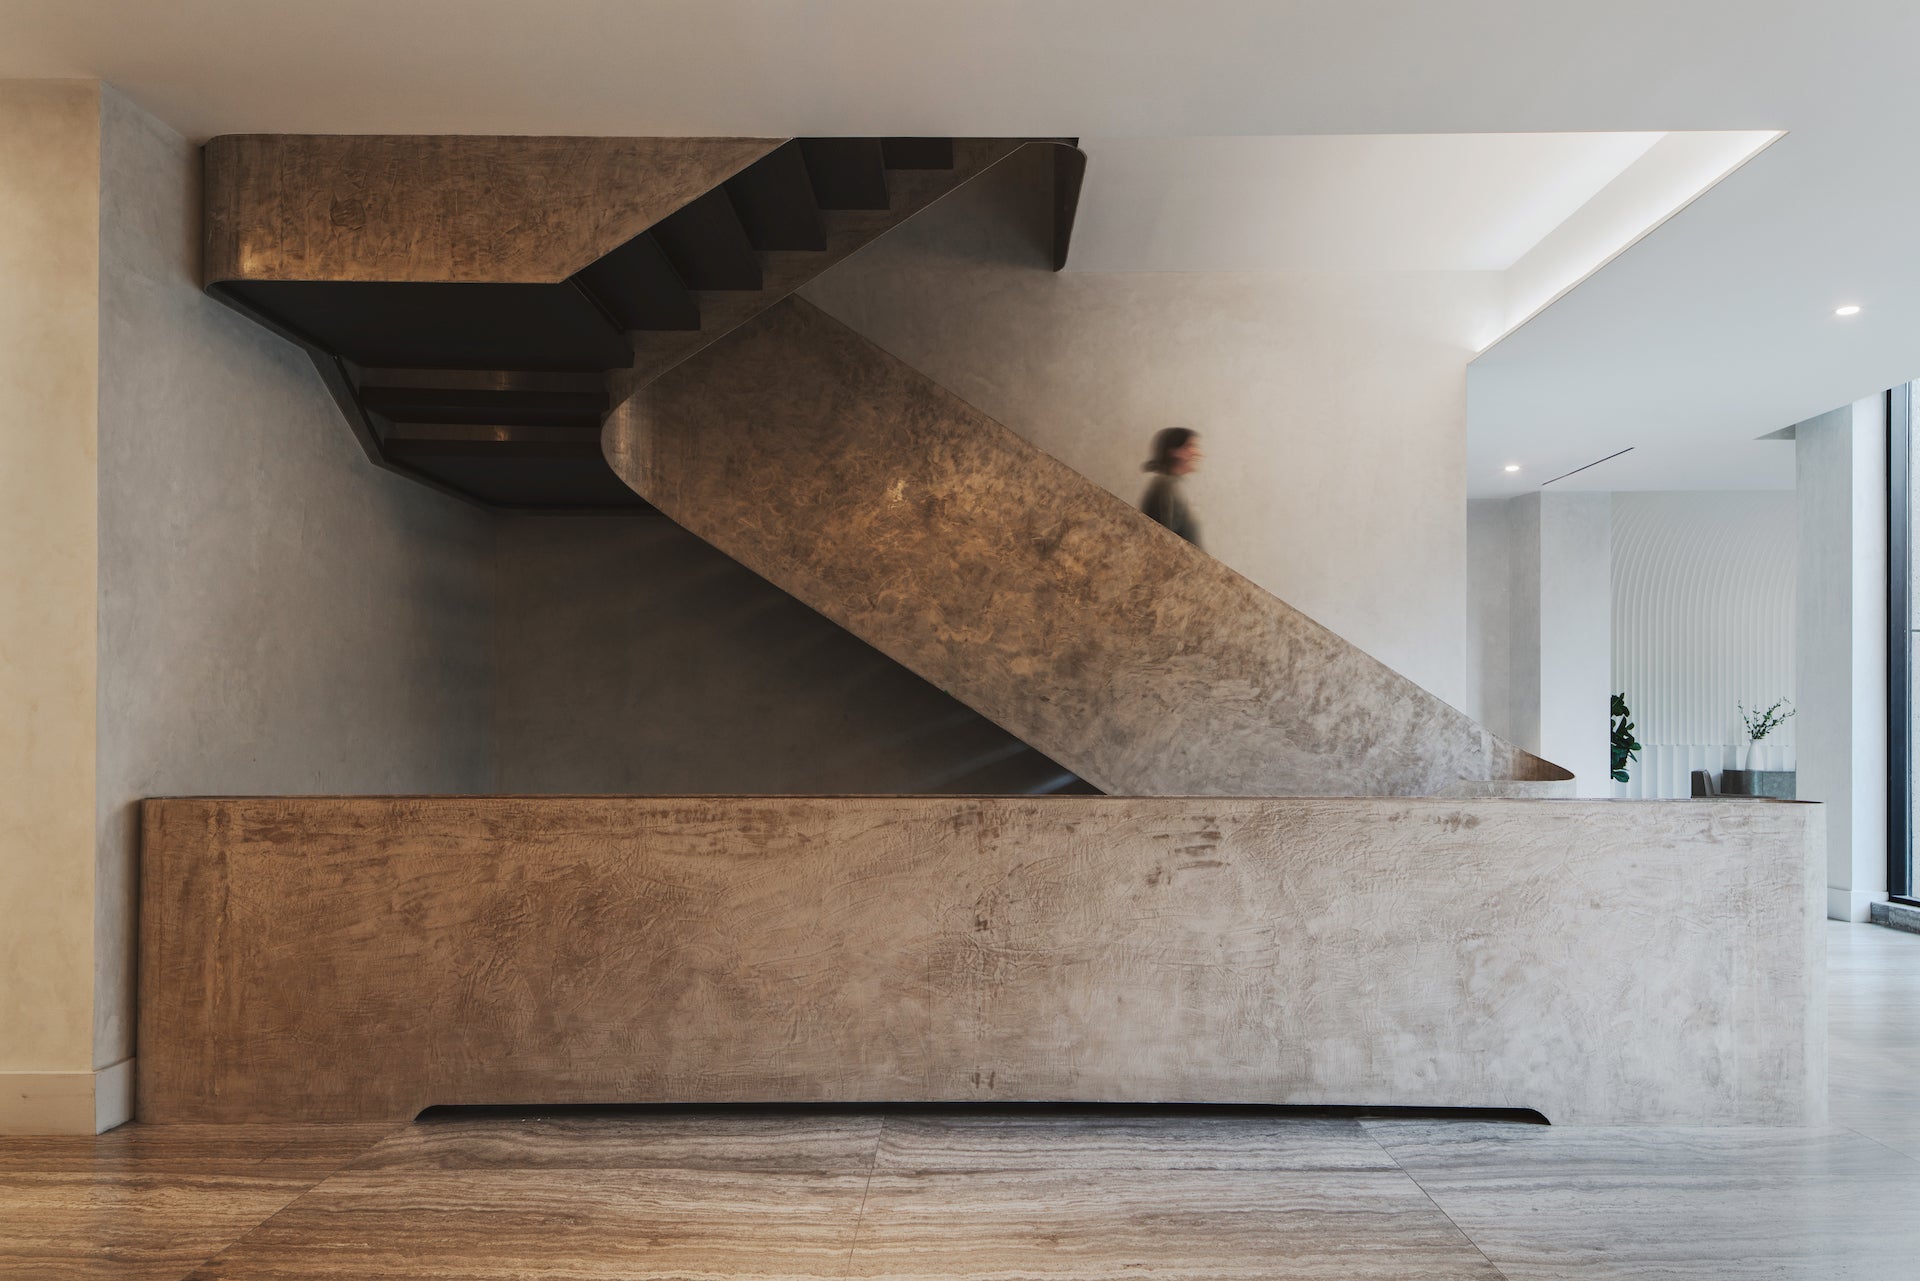 Staircase at Saint Marks Place in Brooklyn. Photo by Conor Harrigan, Courtesy of INC Architecture & Design